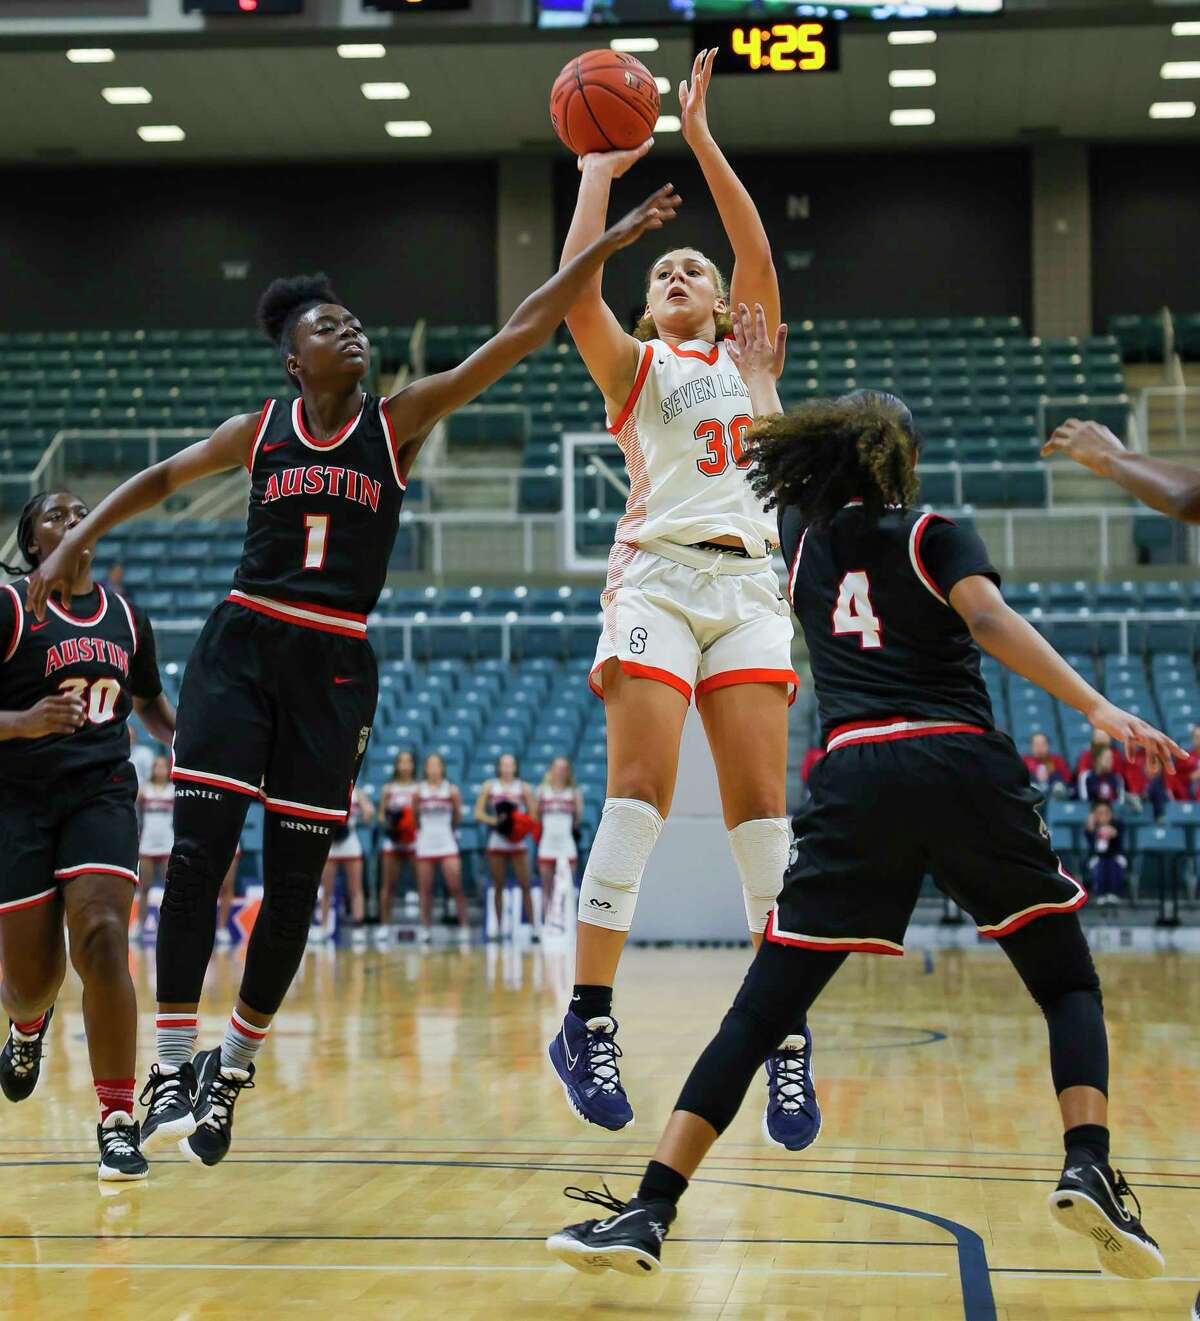 Seven Lakes forward Justice Carlton (30) shoots over guard Andrea Sturdivant (1) and guard Aminah Dixon (4) during the first half of a Region III-6A quarterfinals game between the Seven Lakes Spartans and Austin Bulldogs, Tuesday, Feb. 22, 2022, at the Merrell Center in Katy.